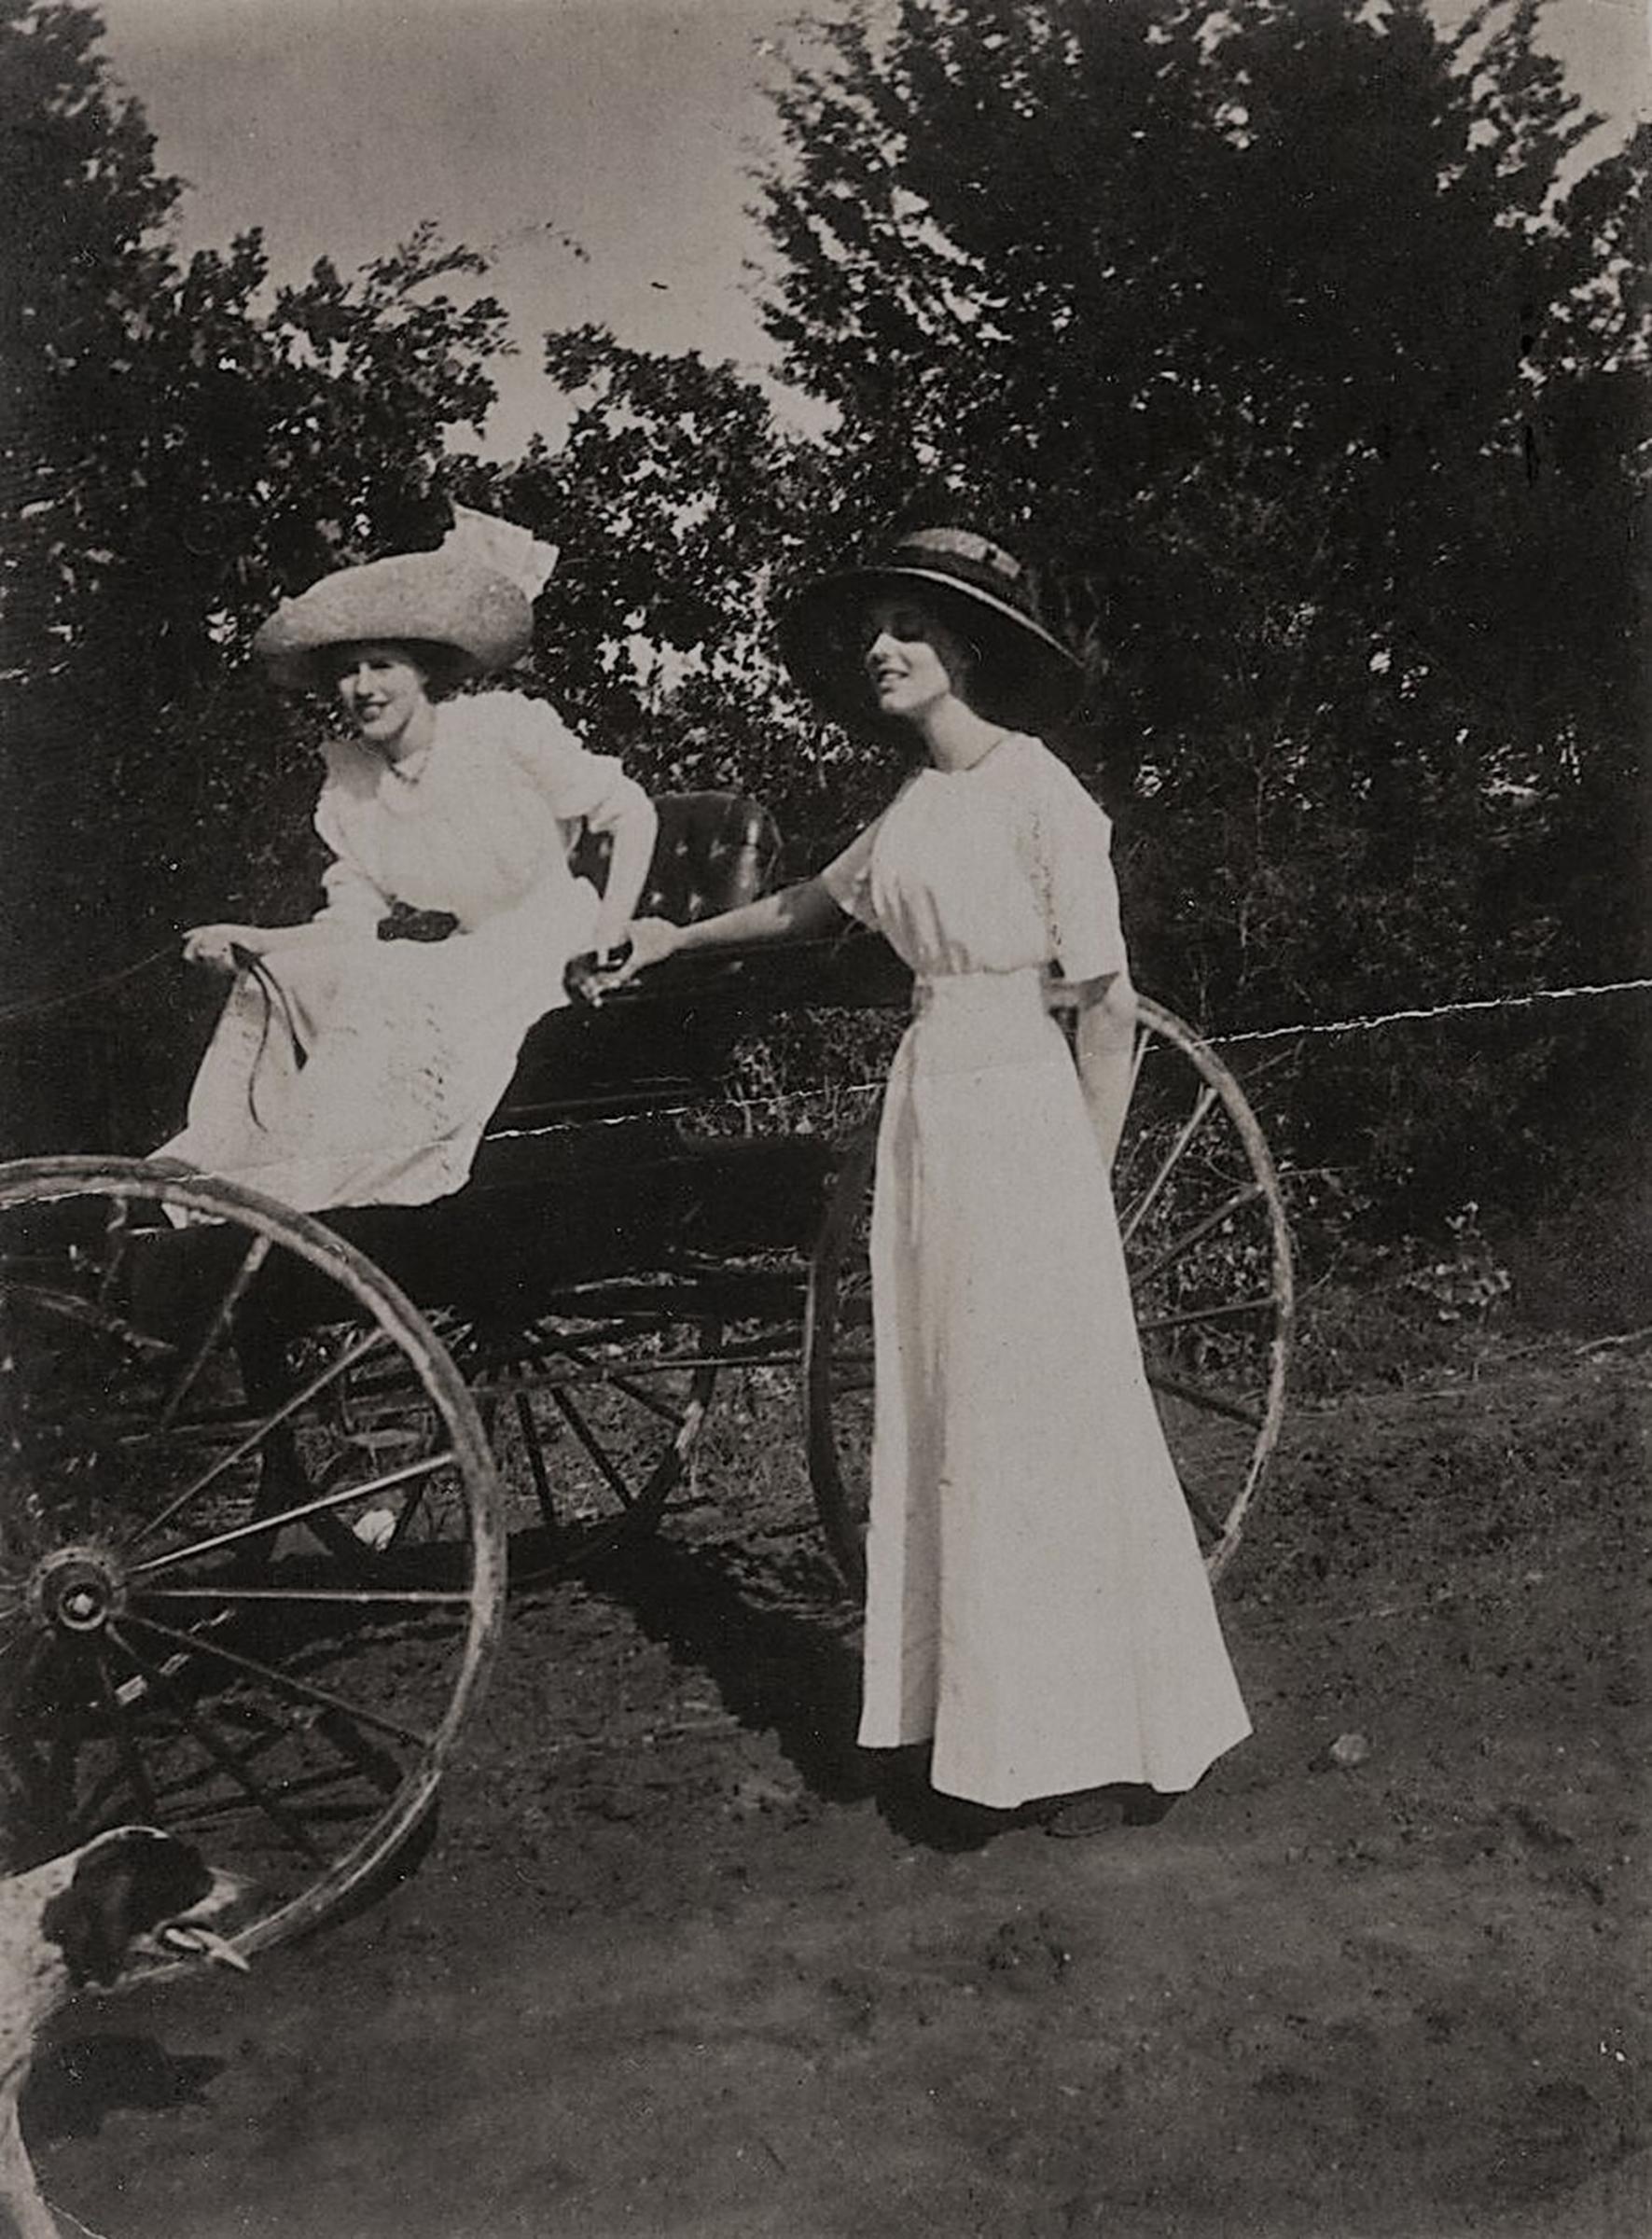 Two women in long old fashioned dresses and hats with a carriage.